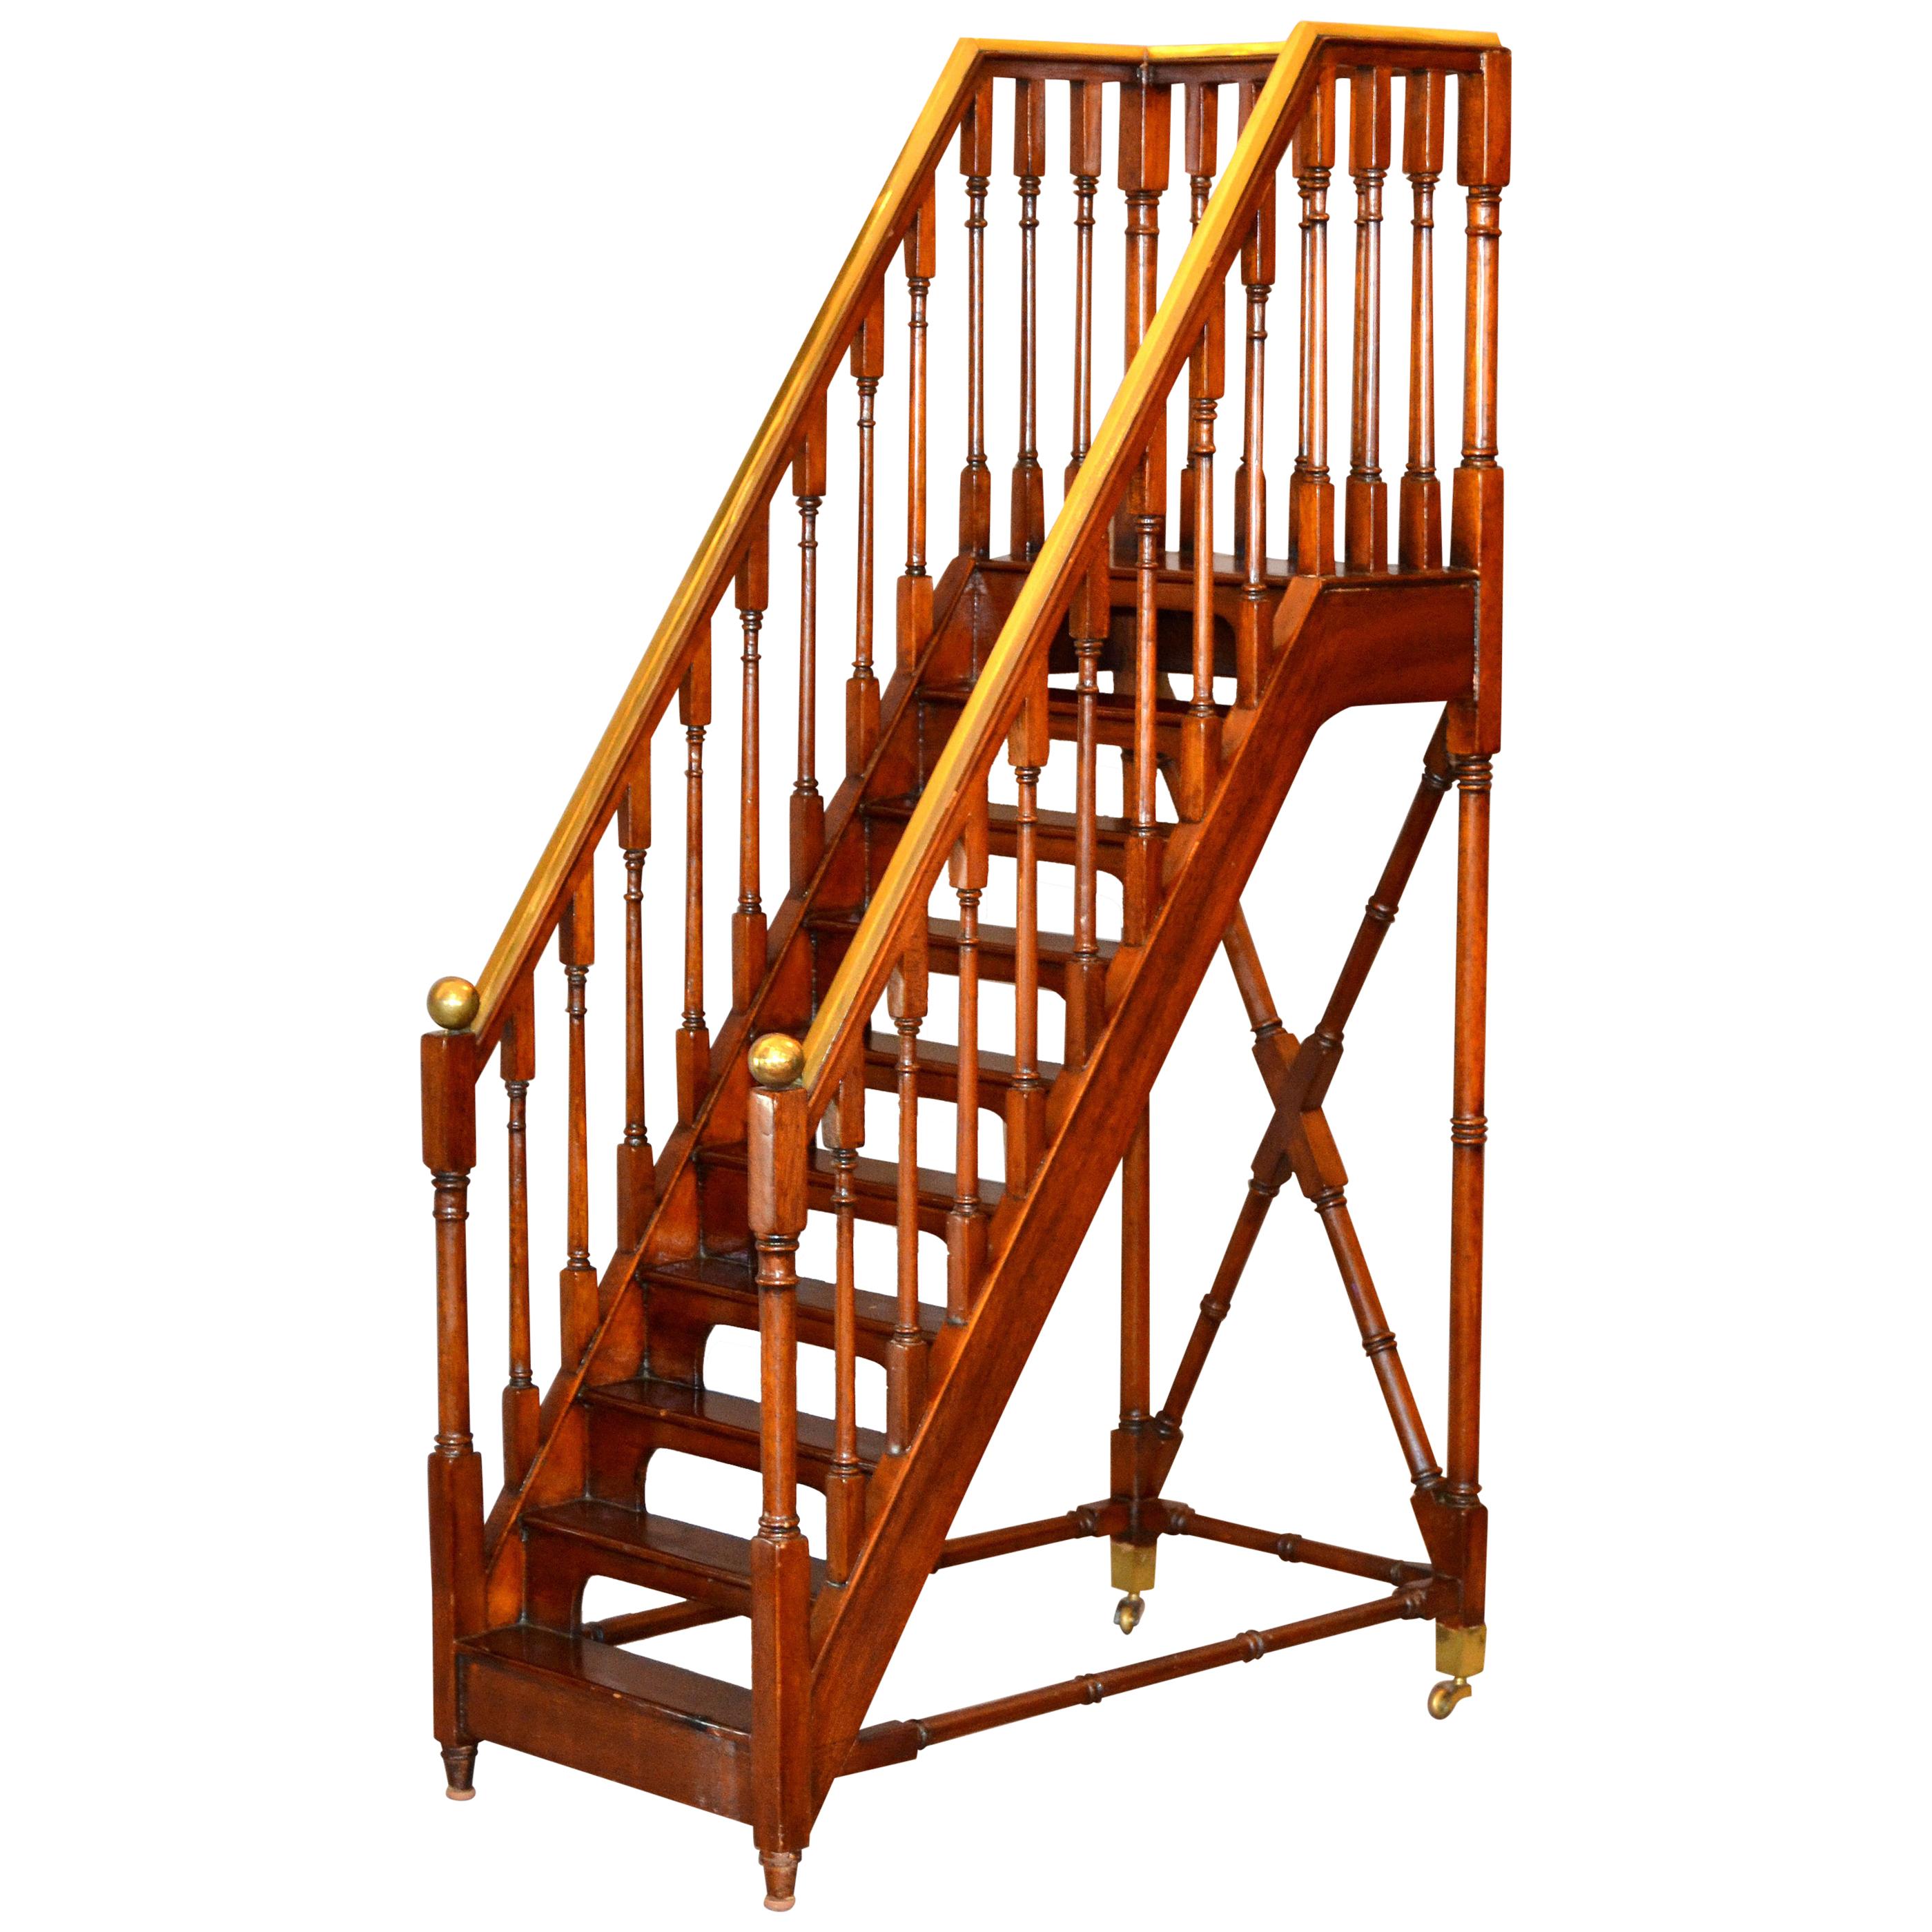 Architectural Decorative Victorian Walnut and Brass Library Steps Ladder, Stairs